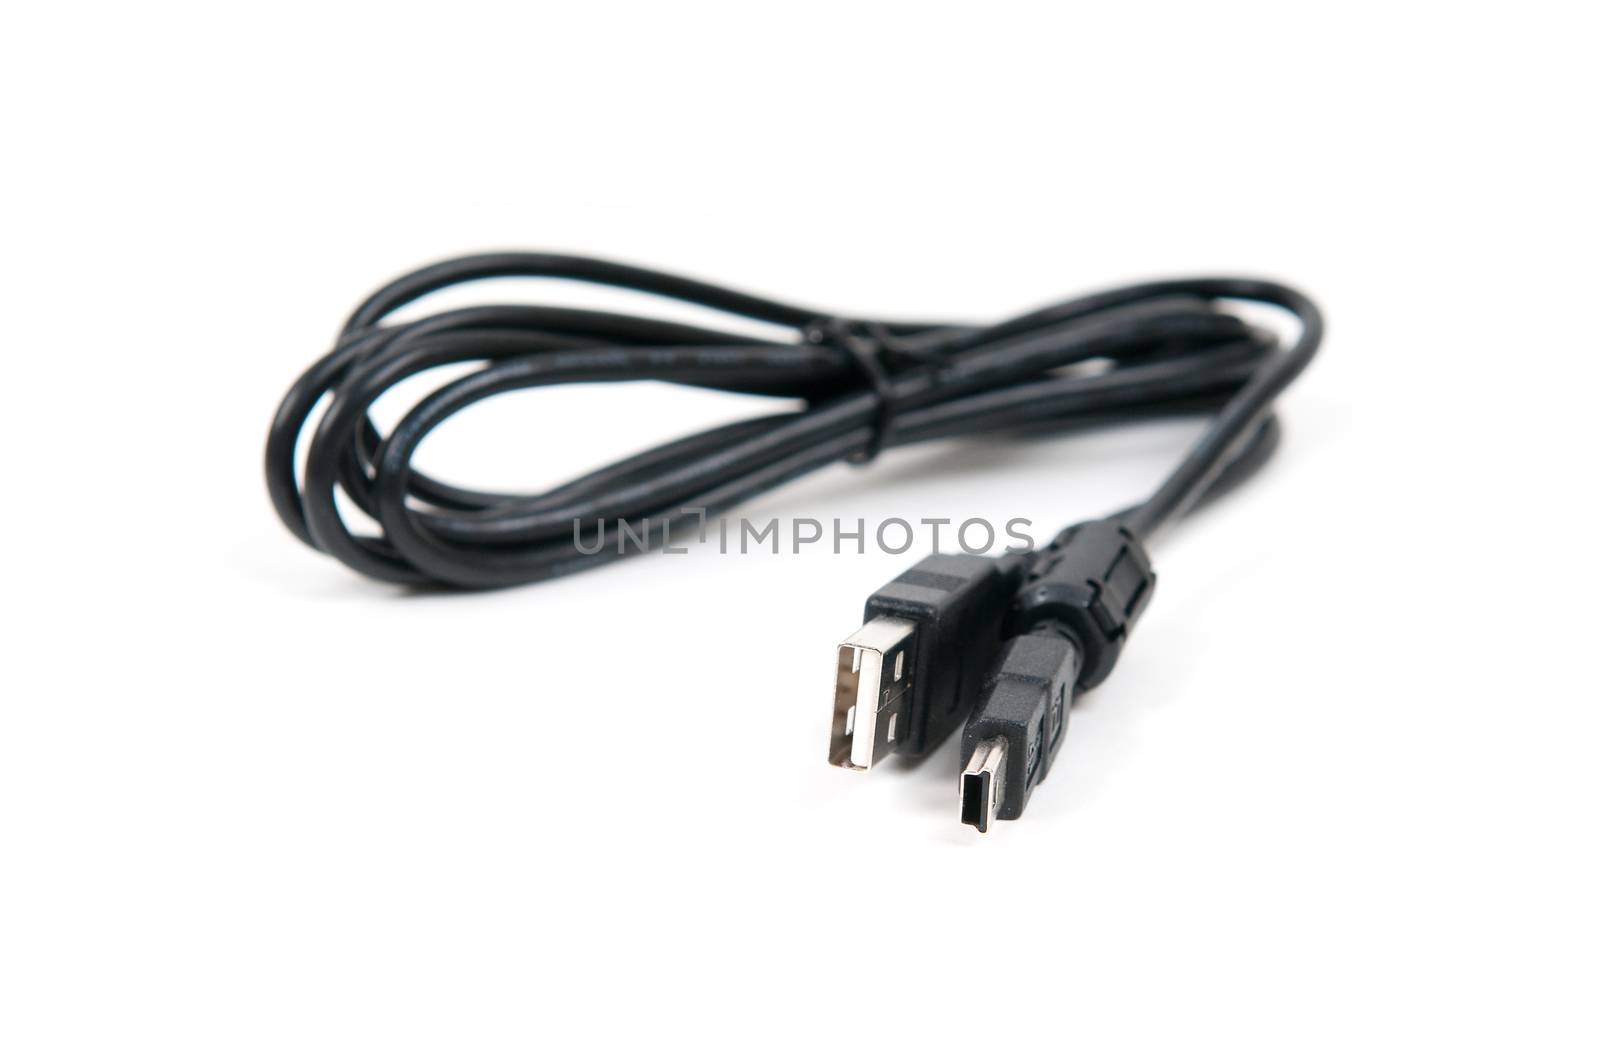 usb to mini-usb cable isolated on white background